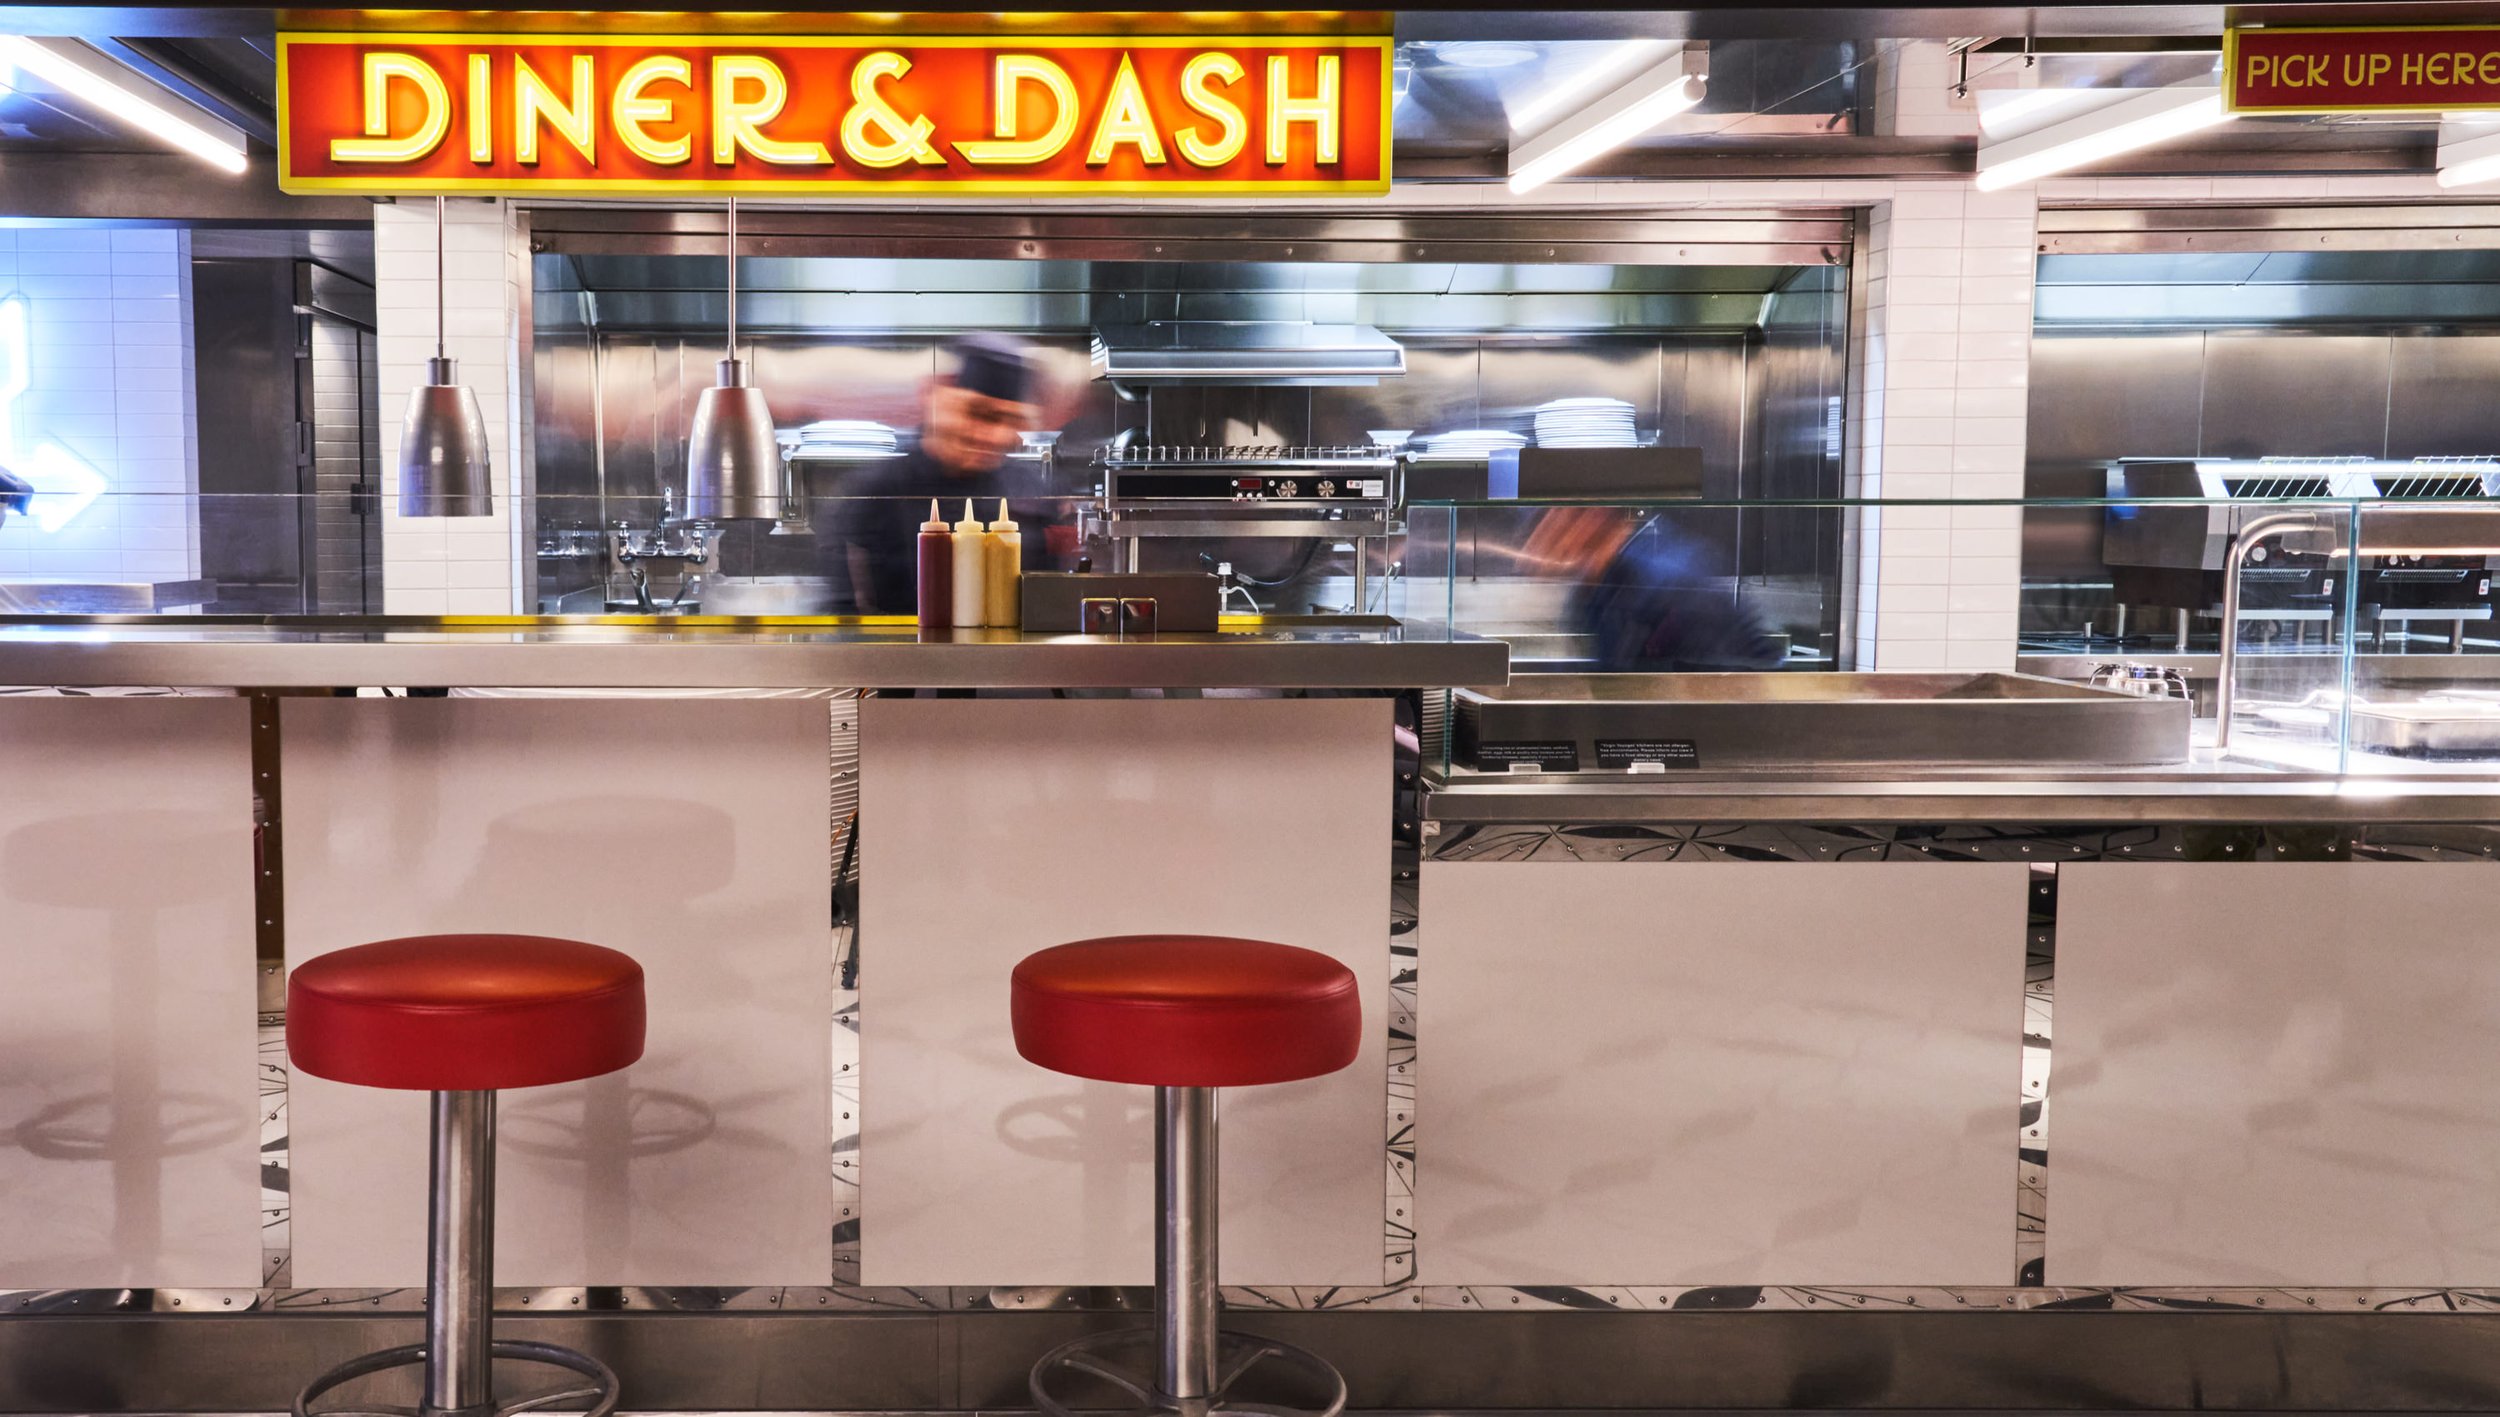 IMG-FNB-the-galley-diner-and-dash-architectural-main-v1-01-5322-3000x1700.jpg